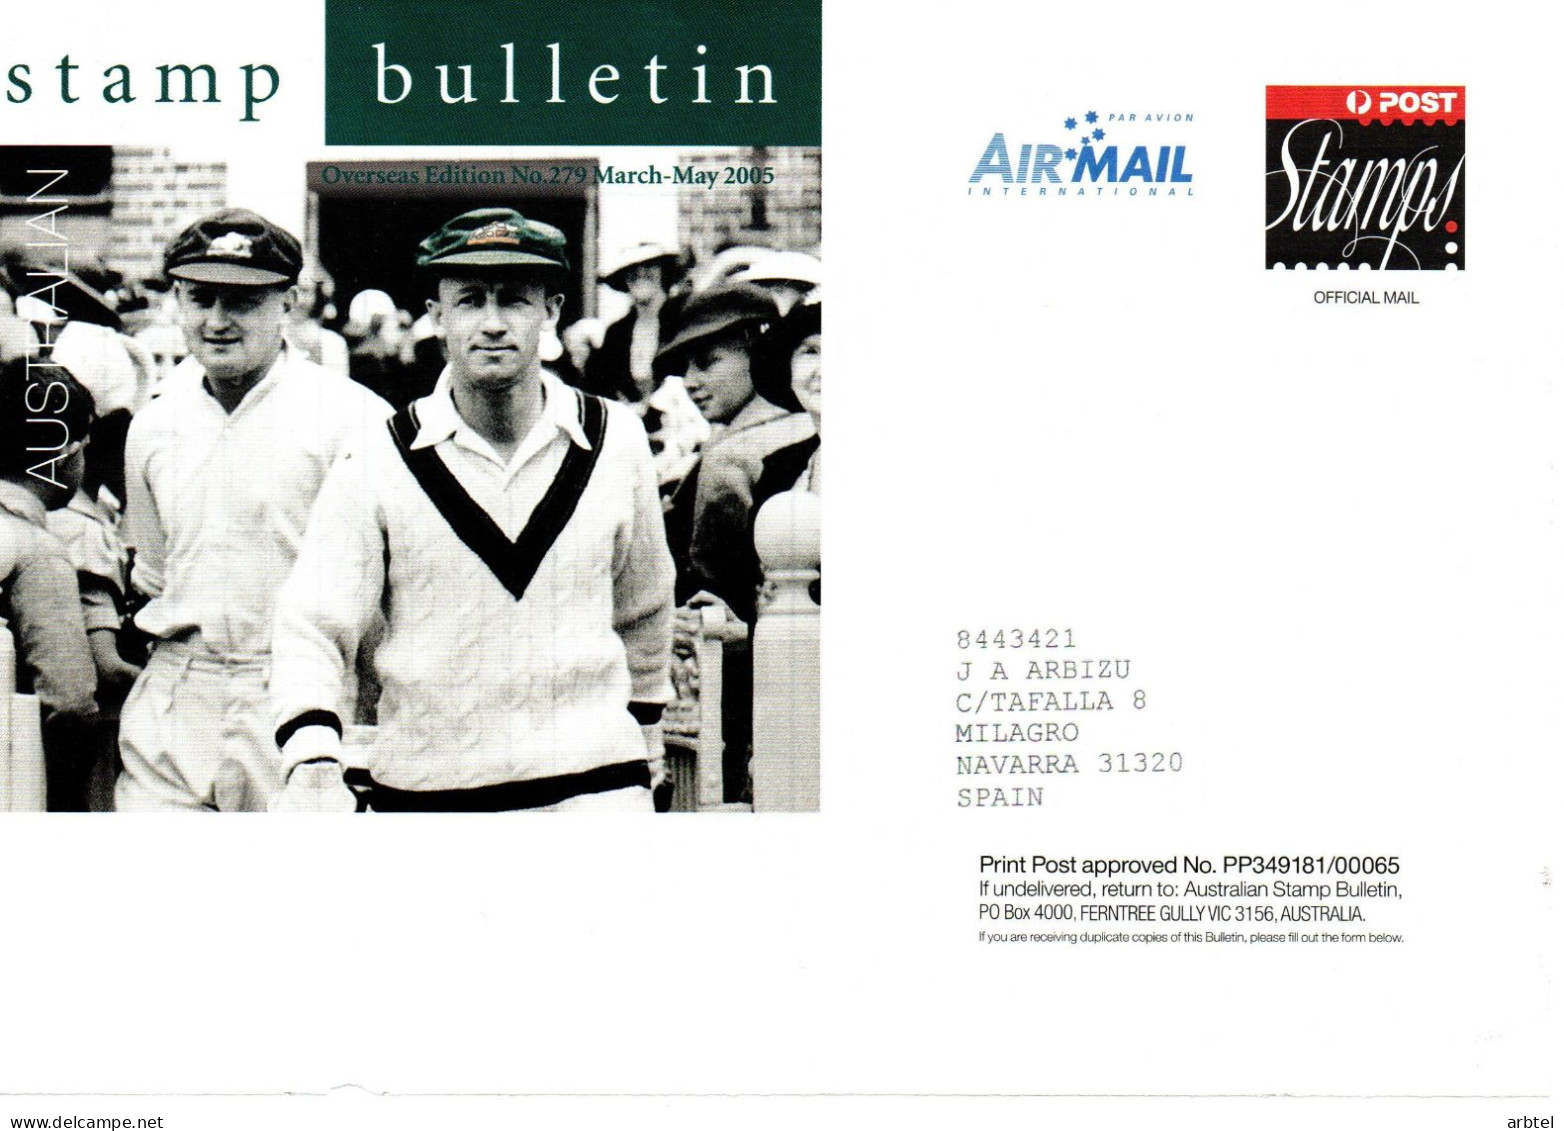 AUSTRALIA STAMP BULLETIN FRONTAL FRONT OFFICIAL MAIL 2005 AUSTRALIAN SPORT - Covers & Documents